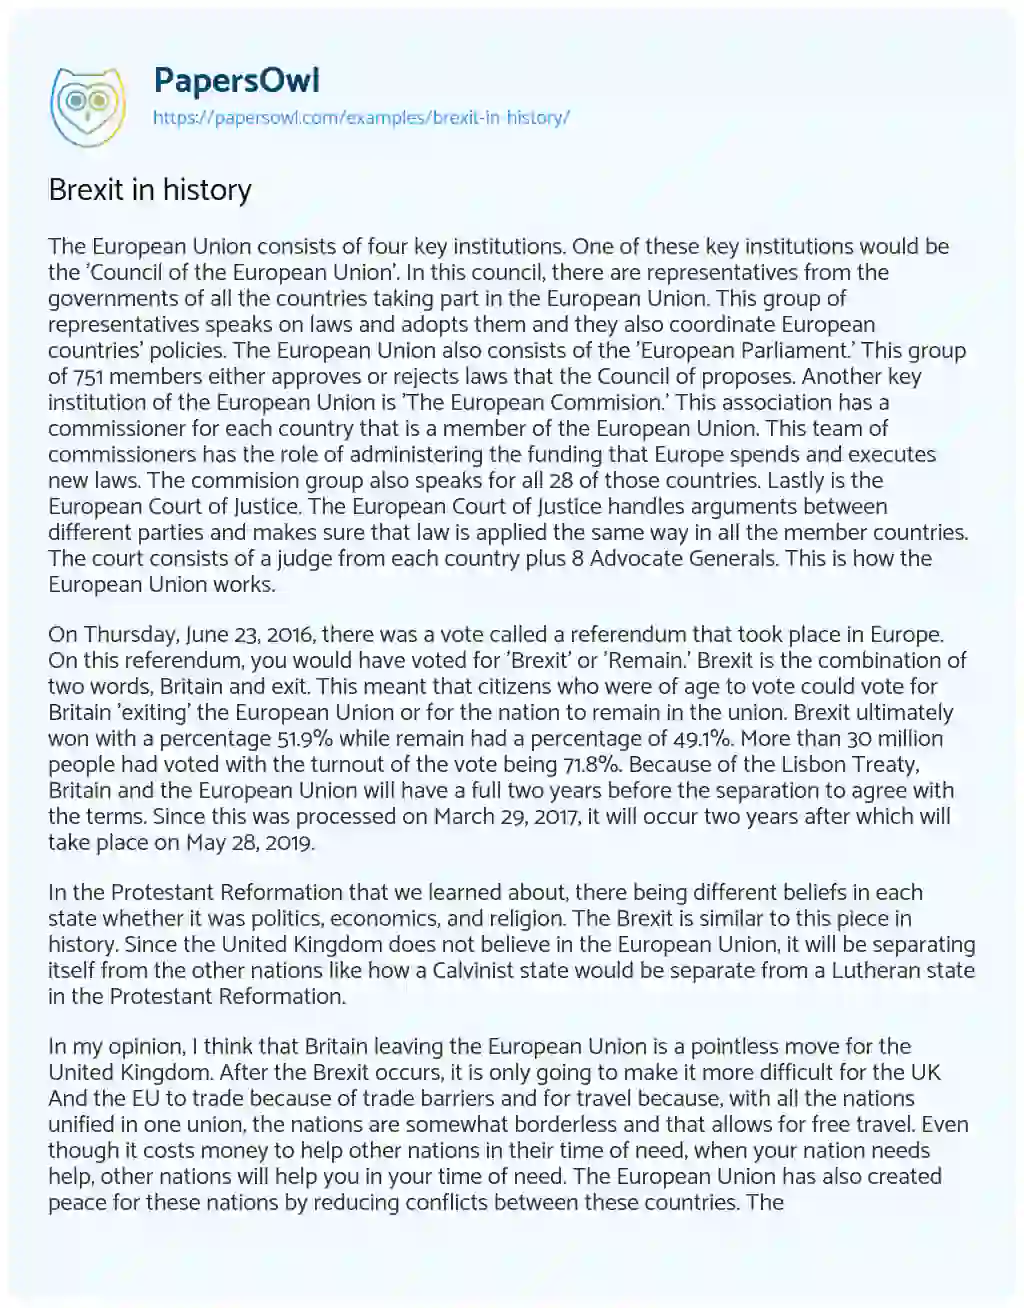 Essay on Brexit in History